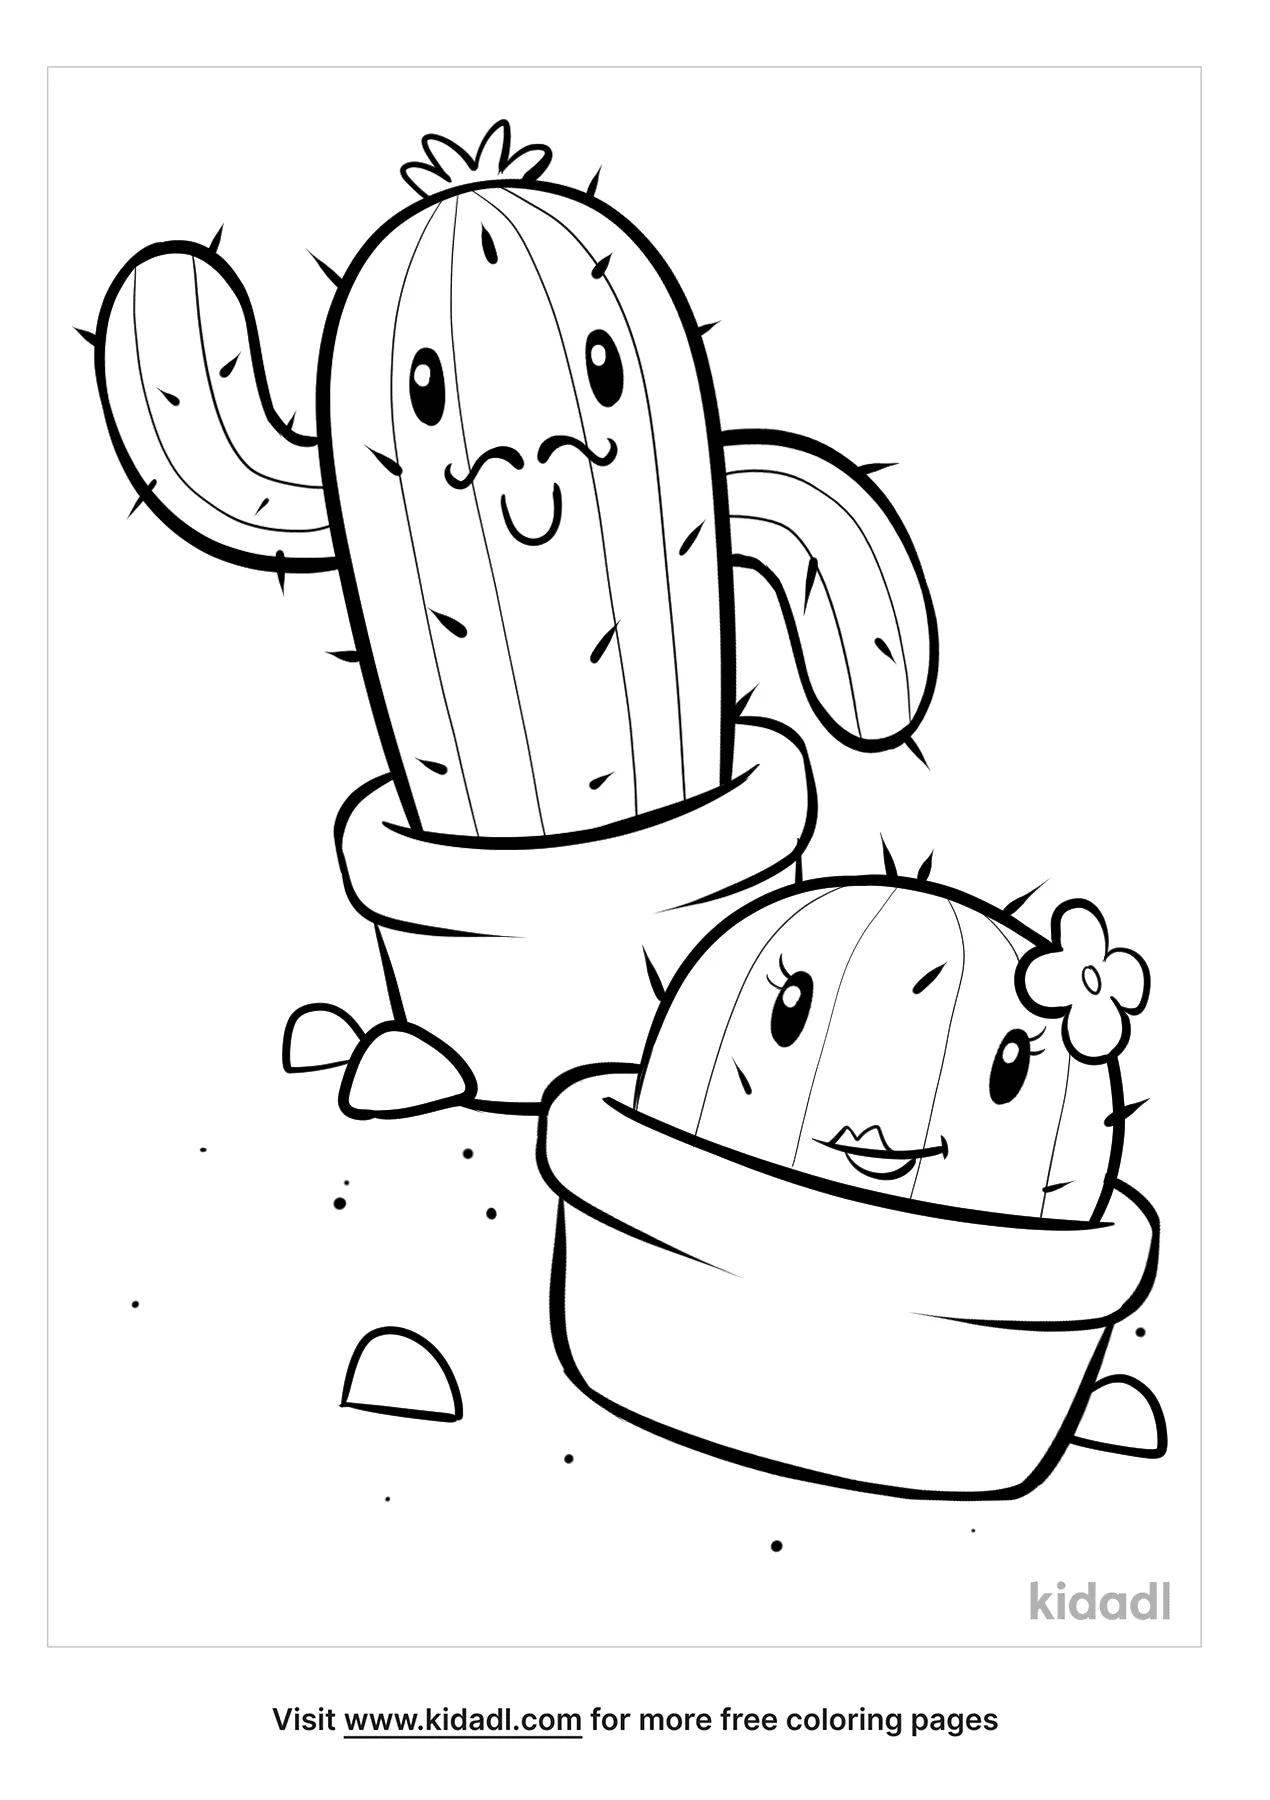 Cute Coloring Pages   Free Animals Coloring Pages   Kidadl